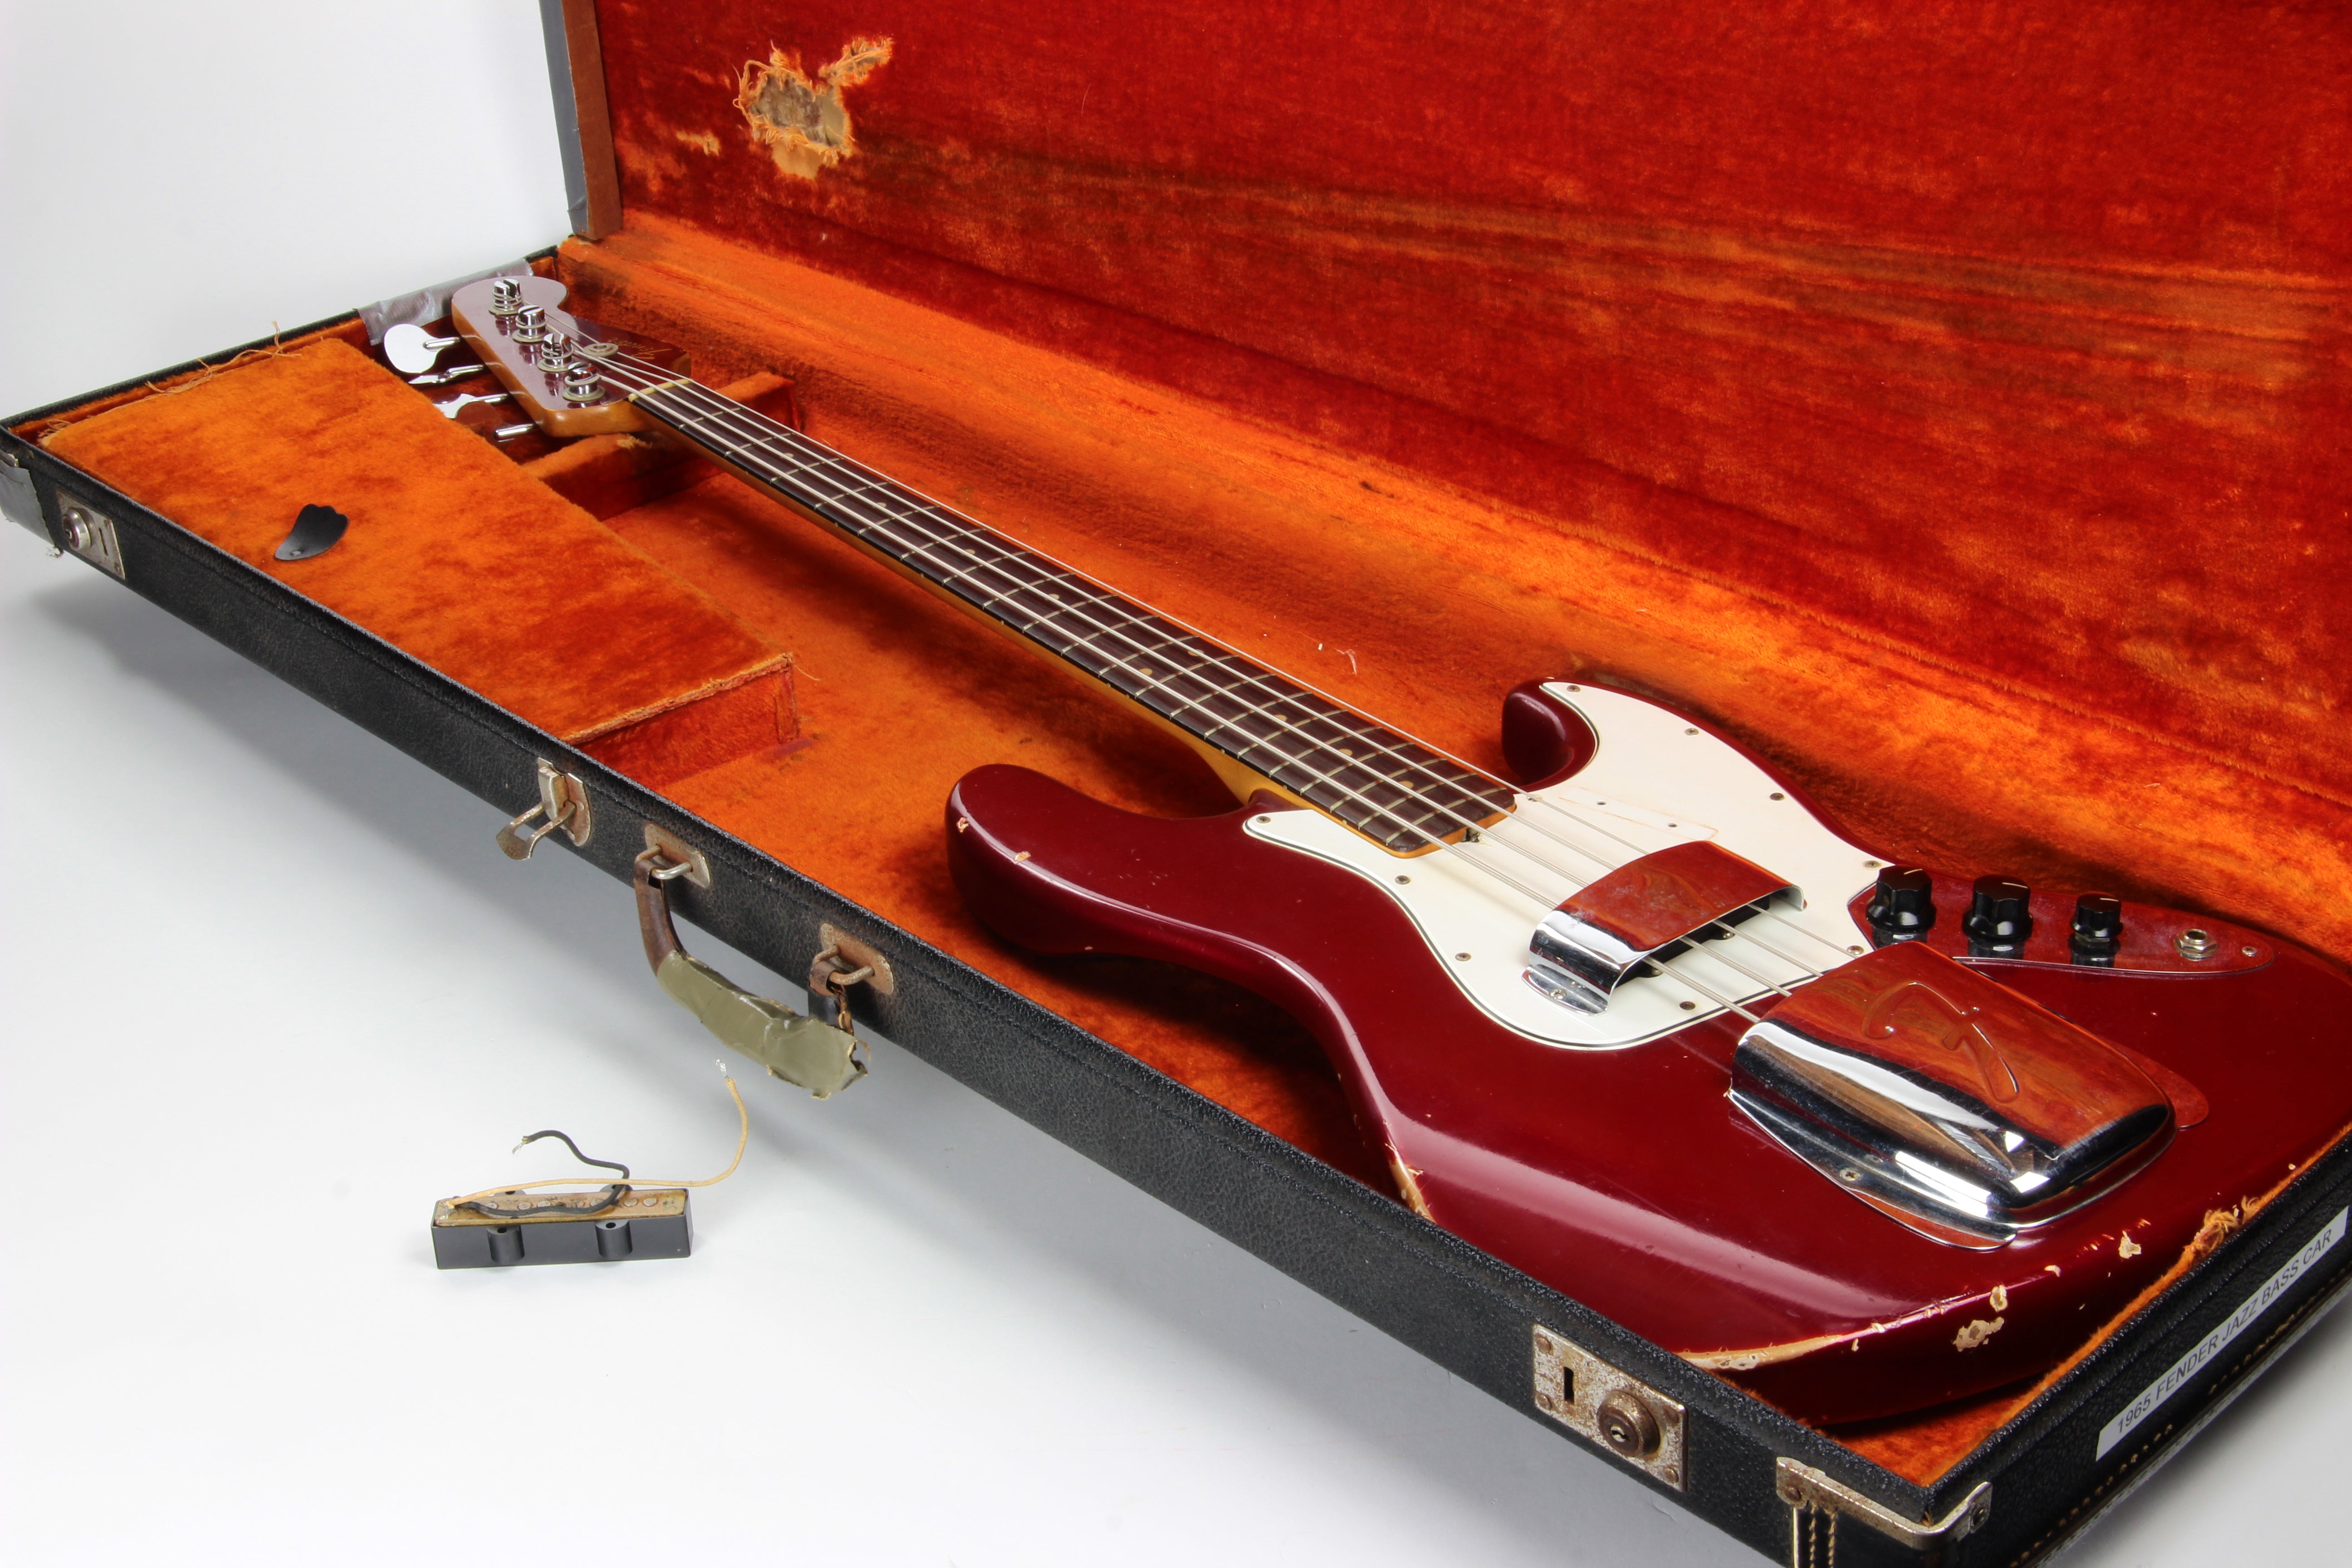 1965 Fender Jazz Bass Candy Apple Red Custom Color - No Binding, Dot Inlays, Matching Headstock!